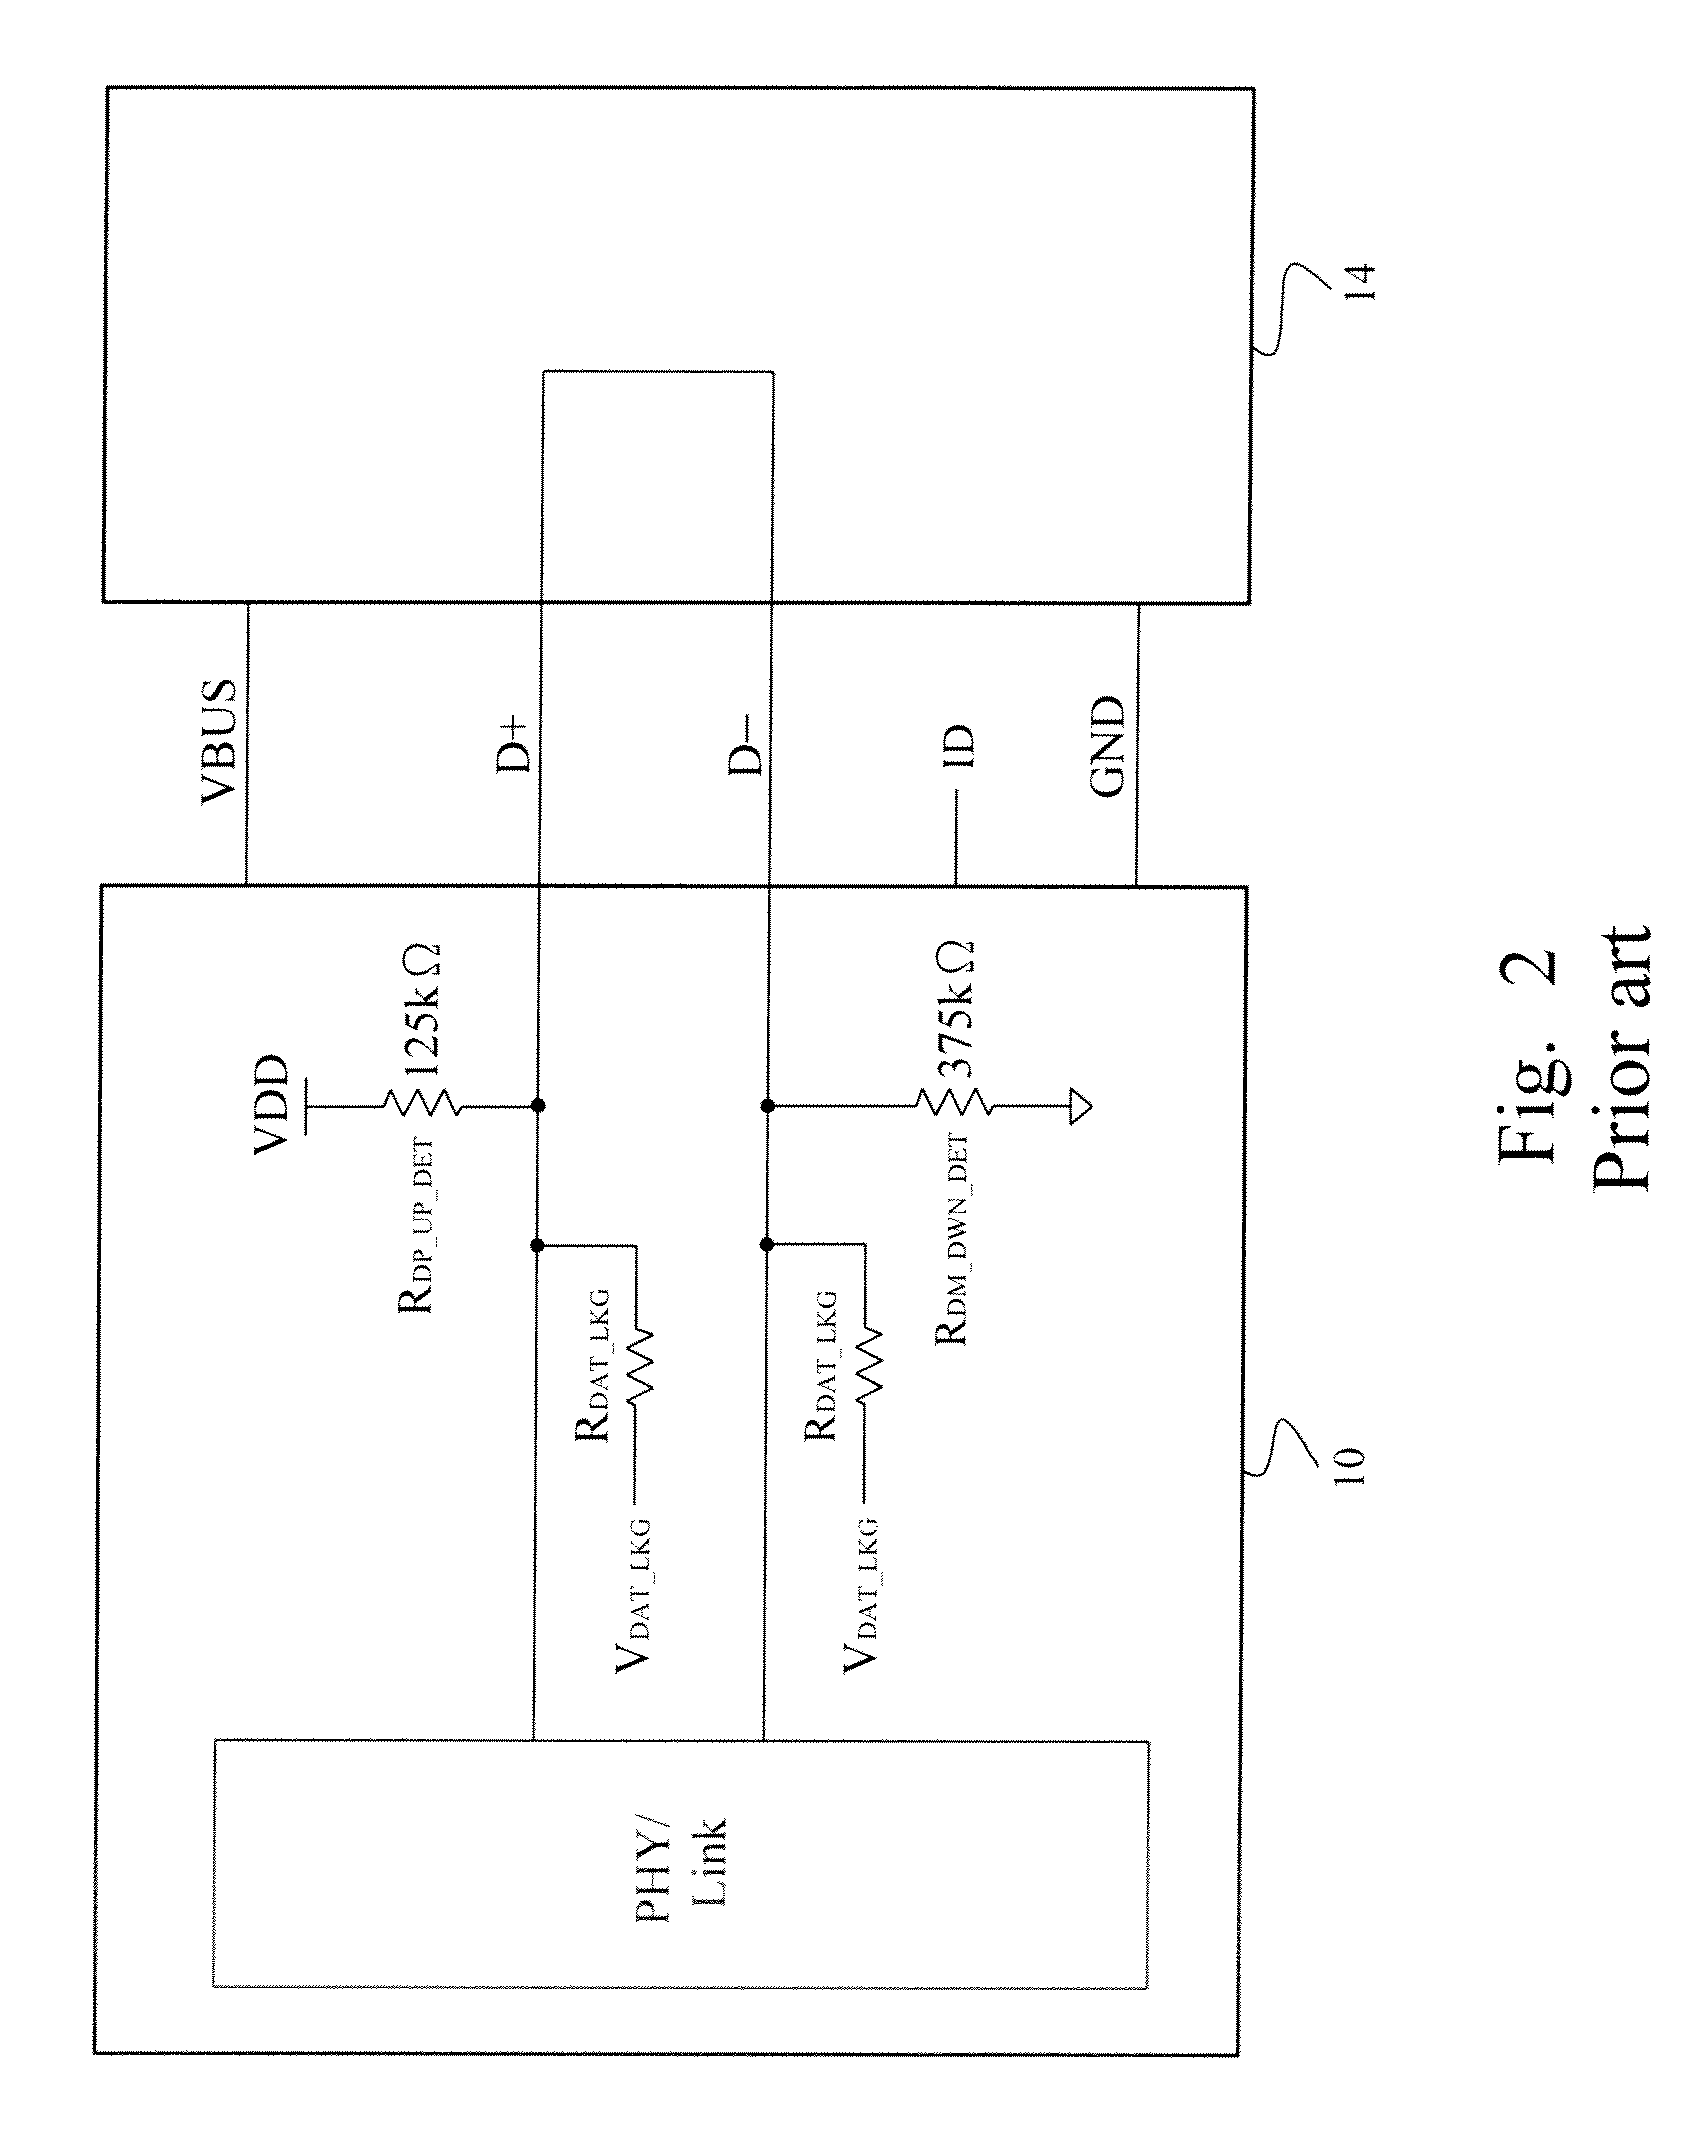 Charger and portable device having the same